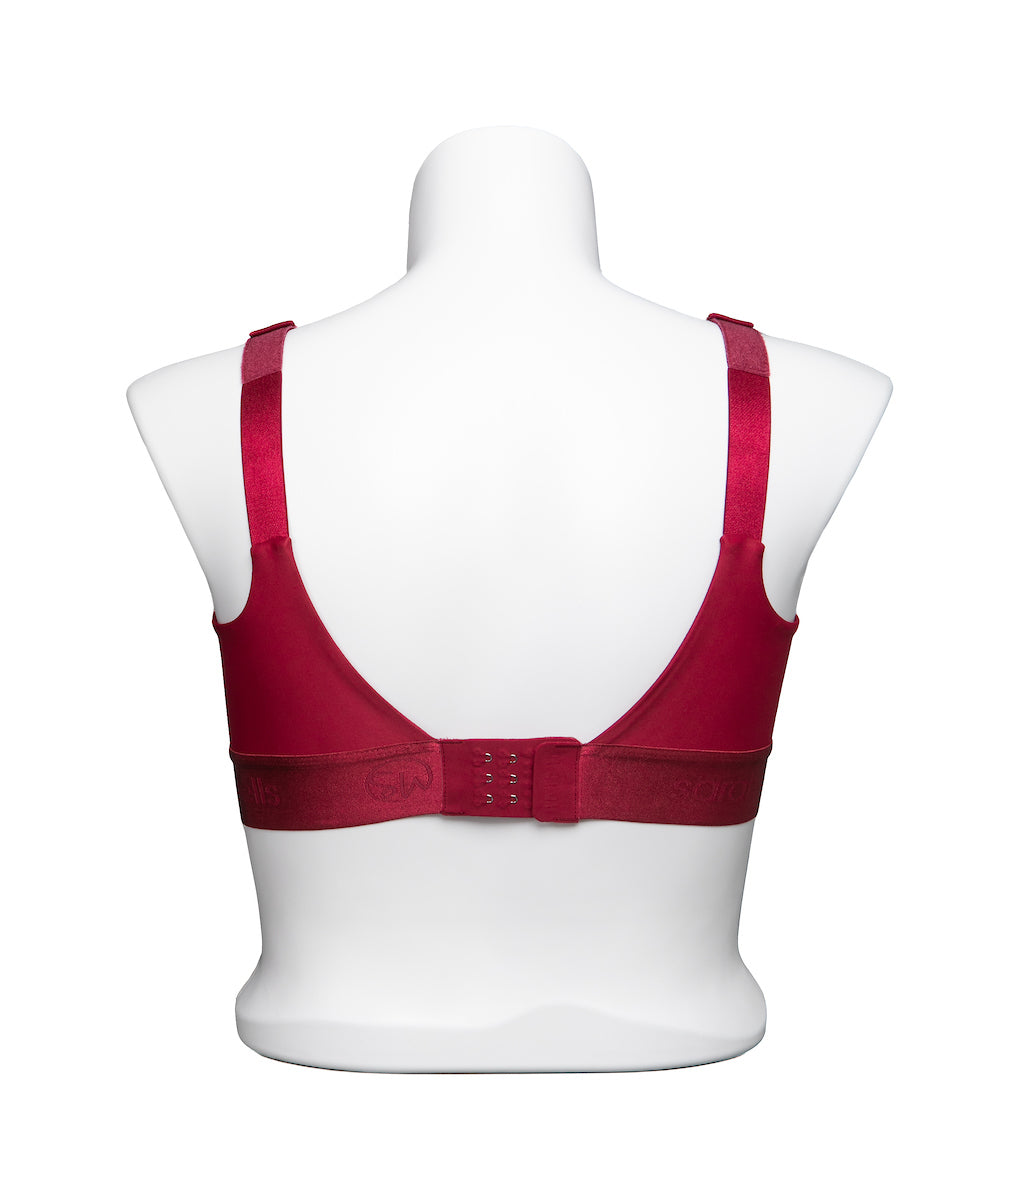 Wholesale bangladesh bras with price For Supportive Underwear 